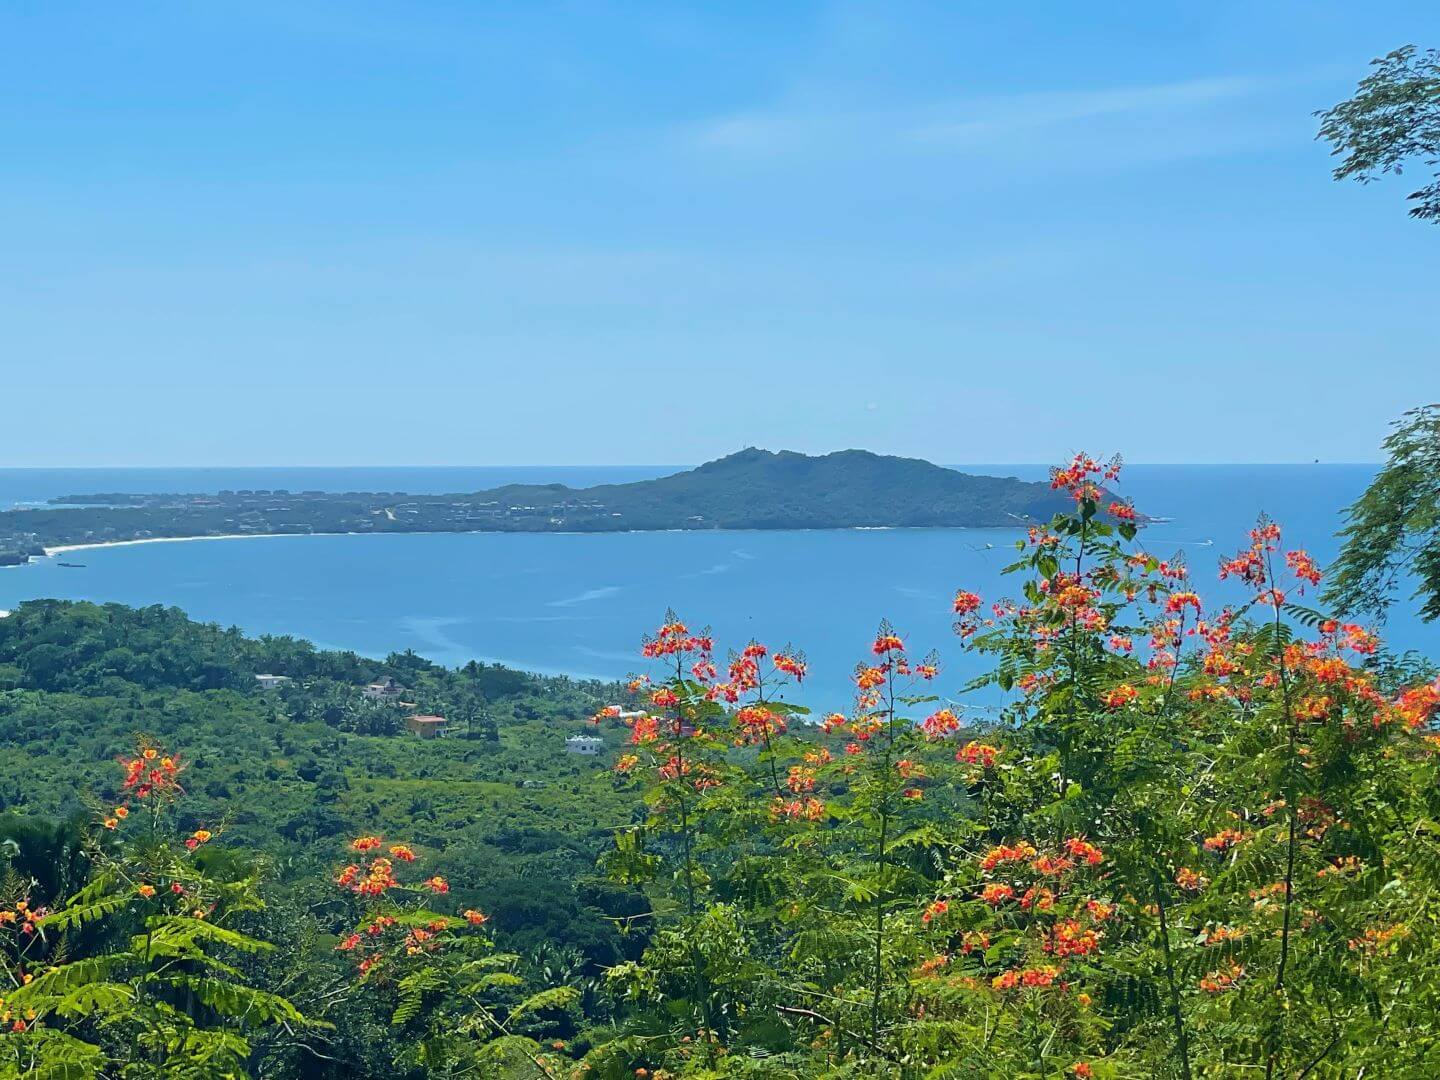 Read more about the article Hiking Monkey Mountain: One of the Best Activities in Riviera Nayarit